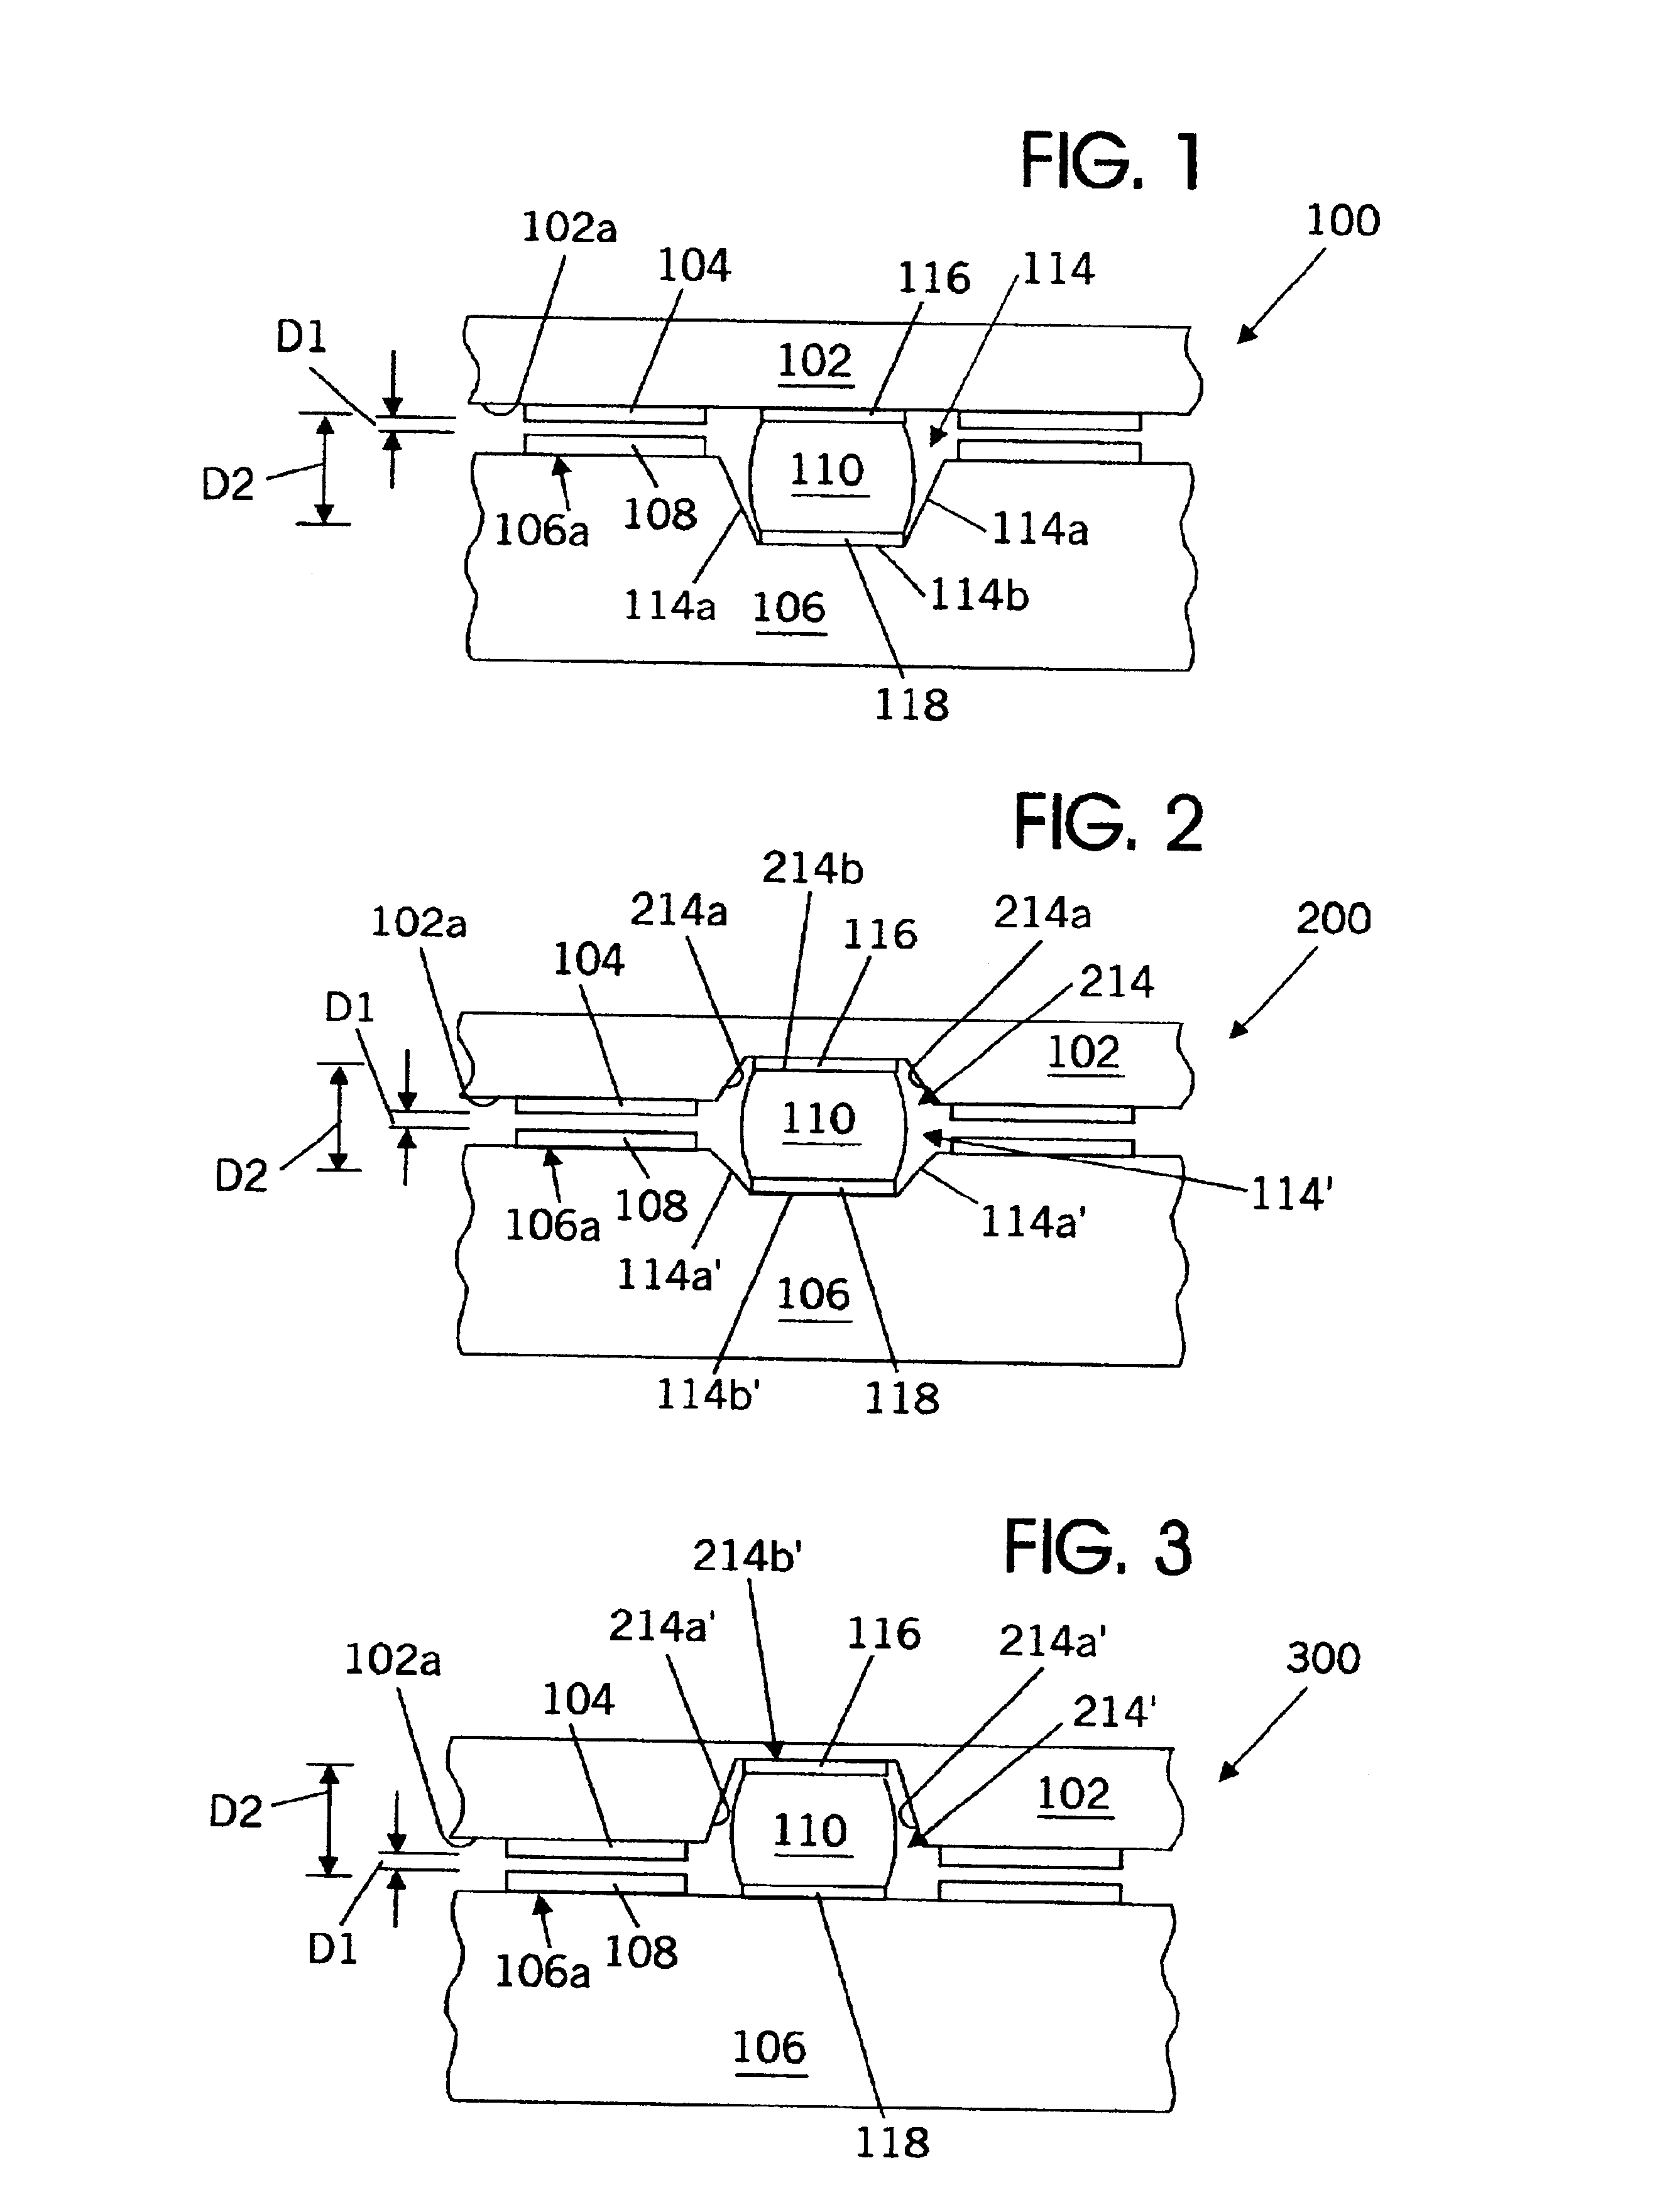 Inductively coupled electrical connectors